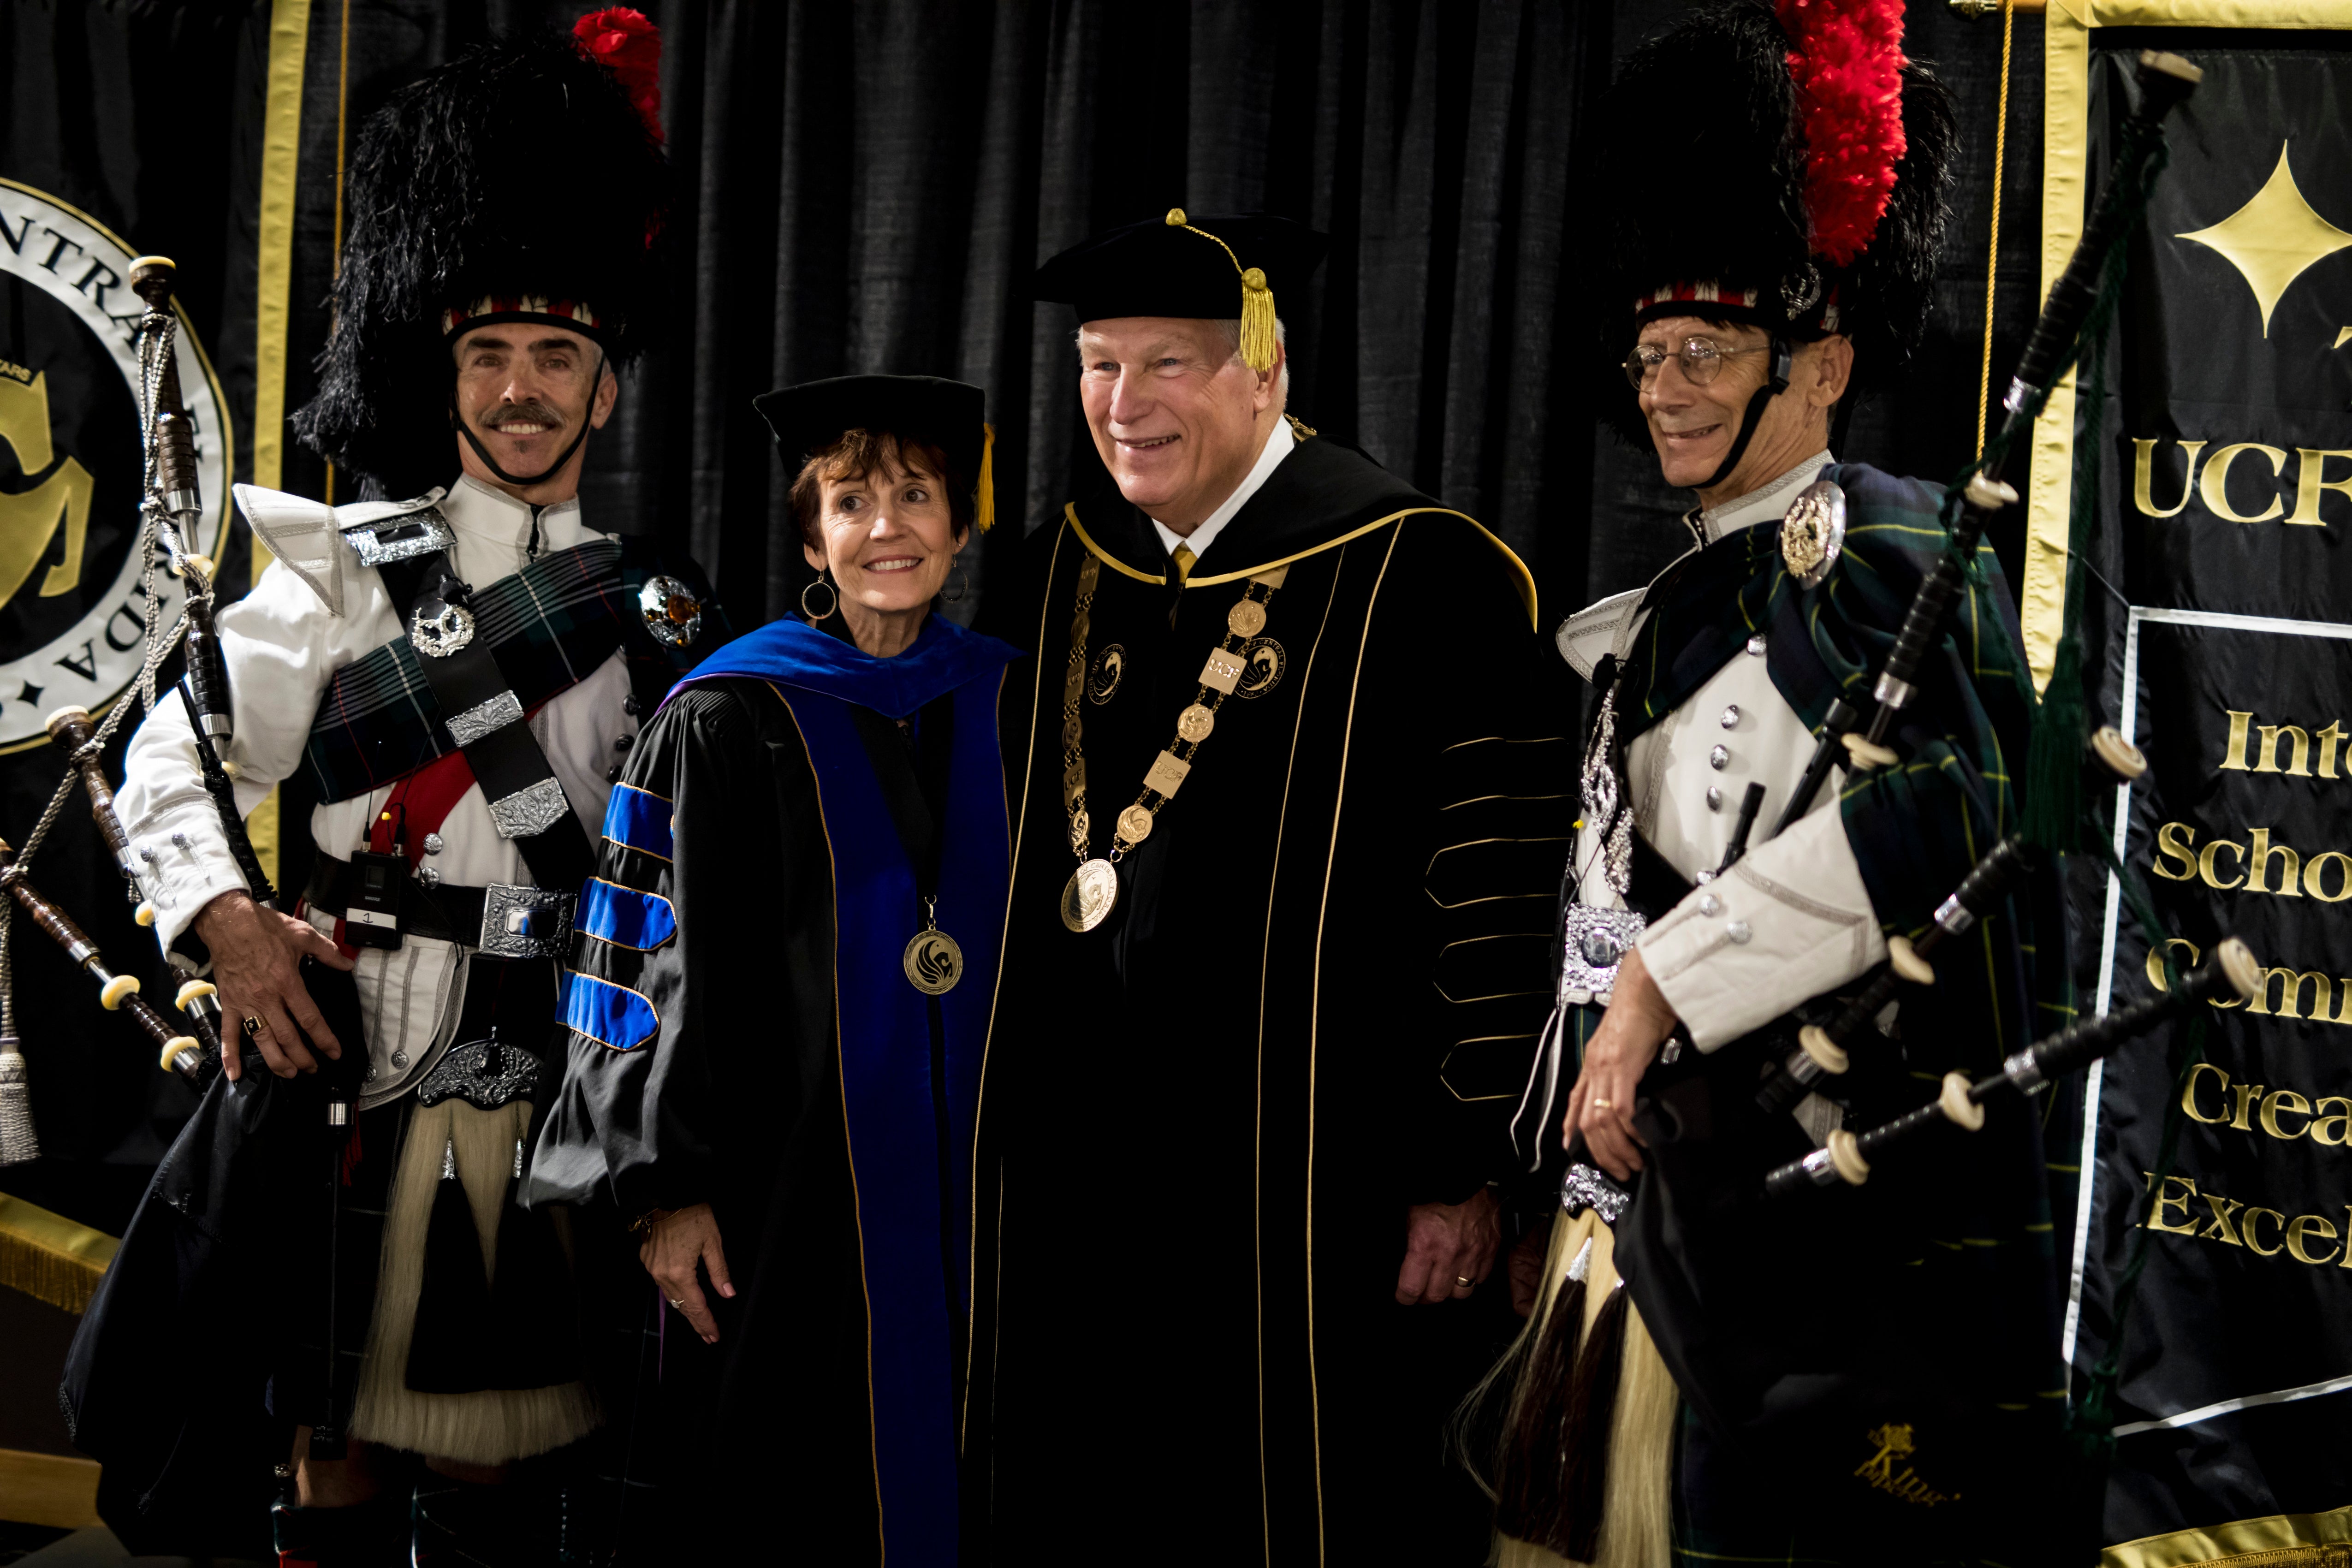 John C. Hitt poses beside a woman as two bagpipe players stand on either side of them for a photo.